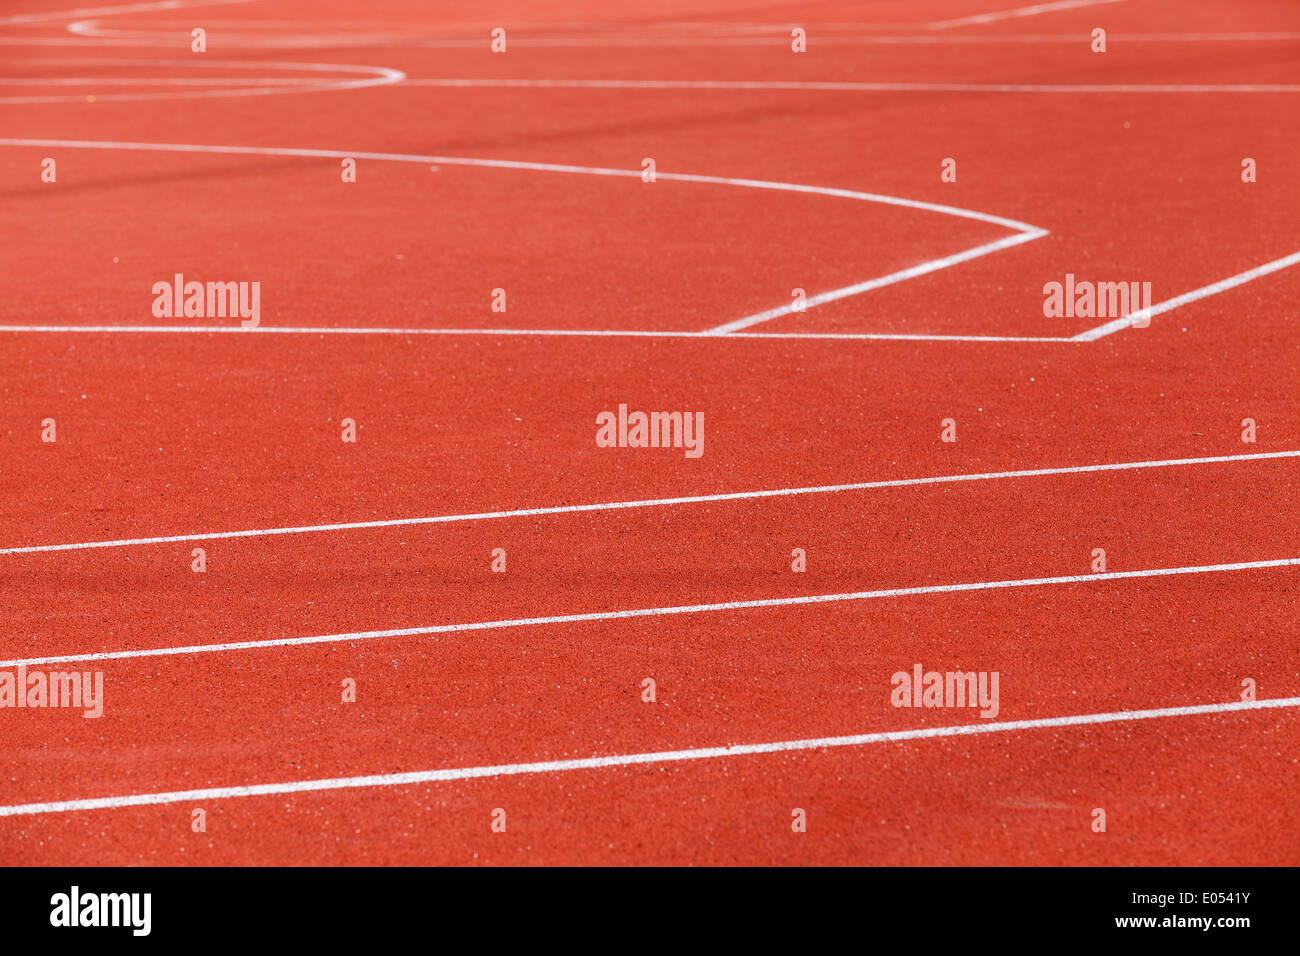 Red sports ground with white marking lines Stock Photo